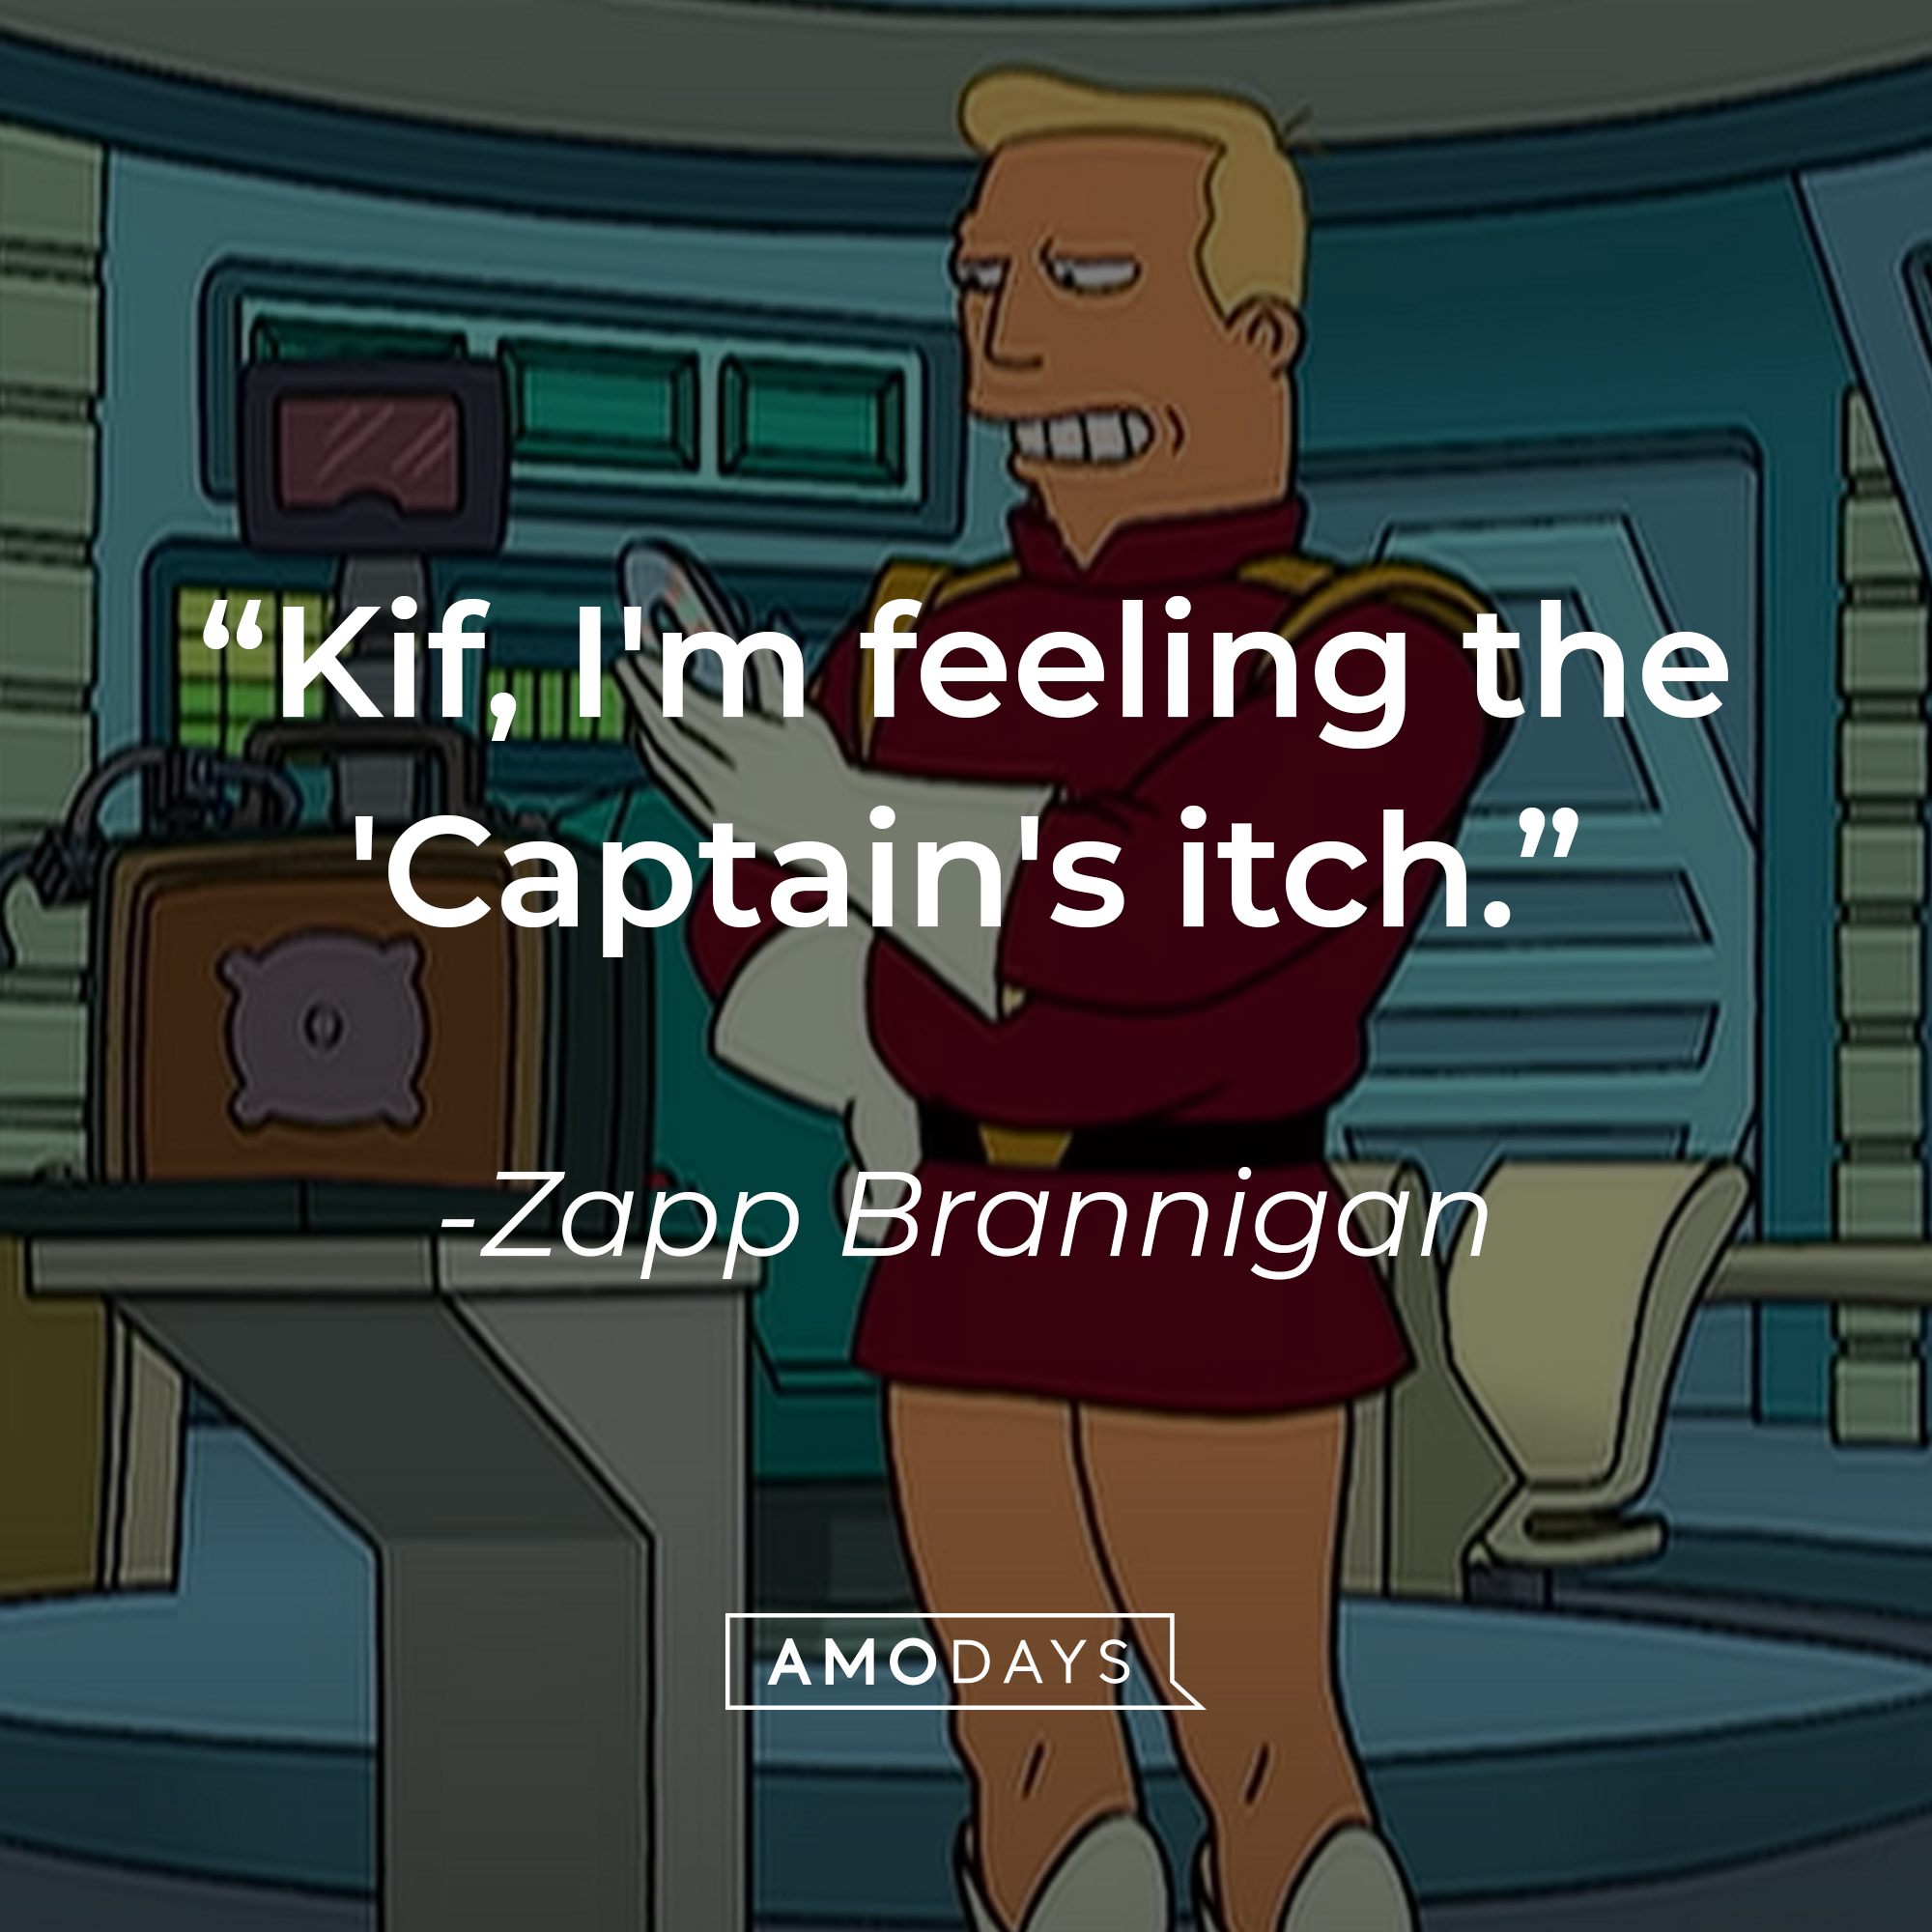 Zapp Brannigan's quote: "Kif, I'm feeling the 'Captain's itch.'" | Source: YouTube/adultswim